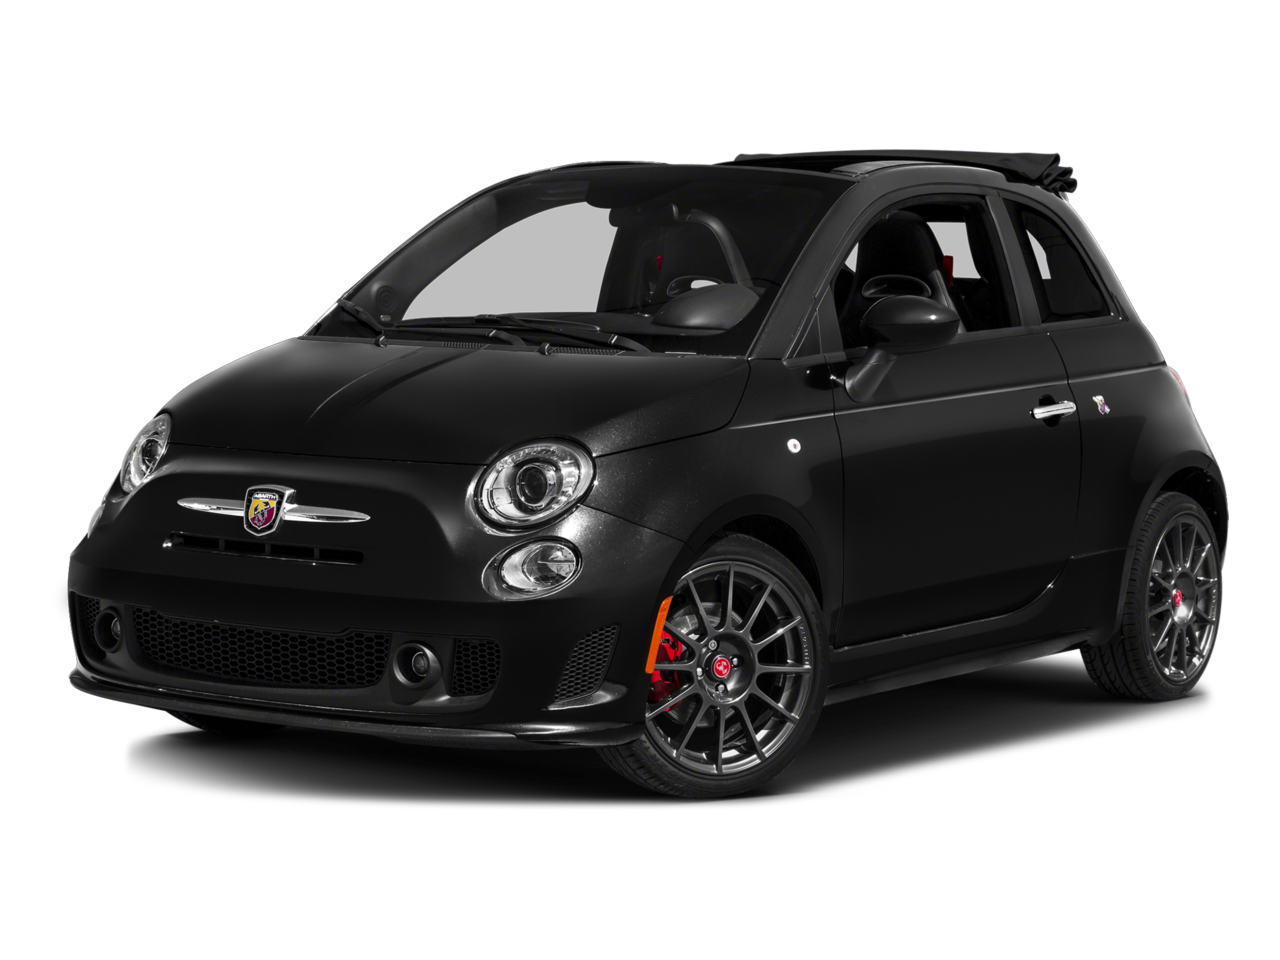 2016 Fiat 500 Repair: Service and Maintenance Cost